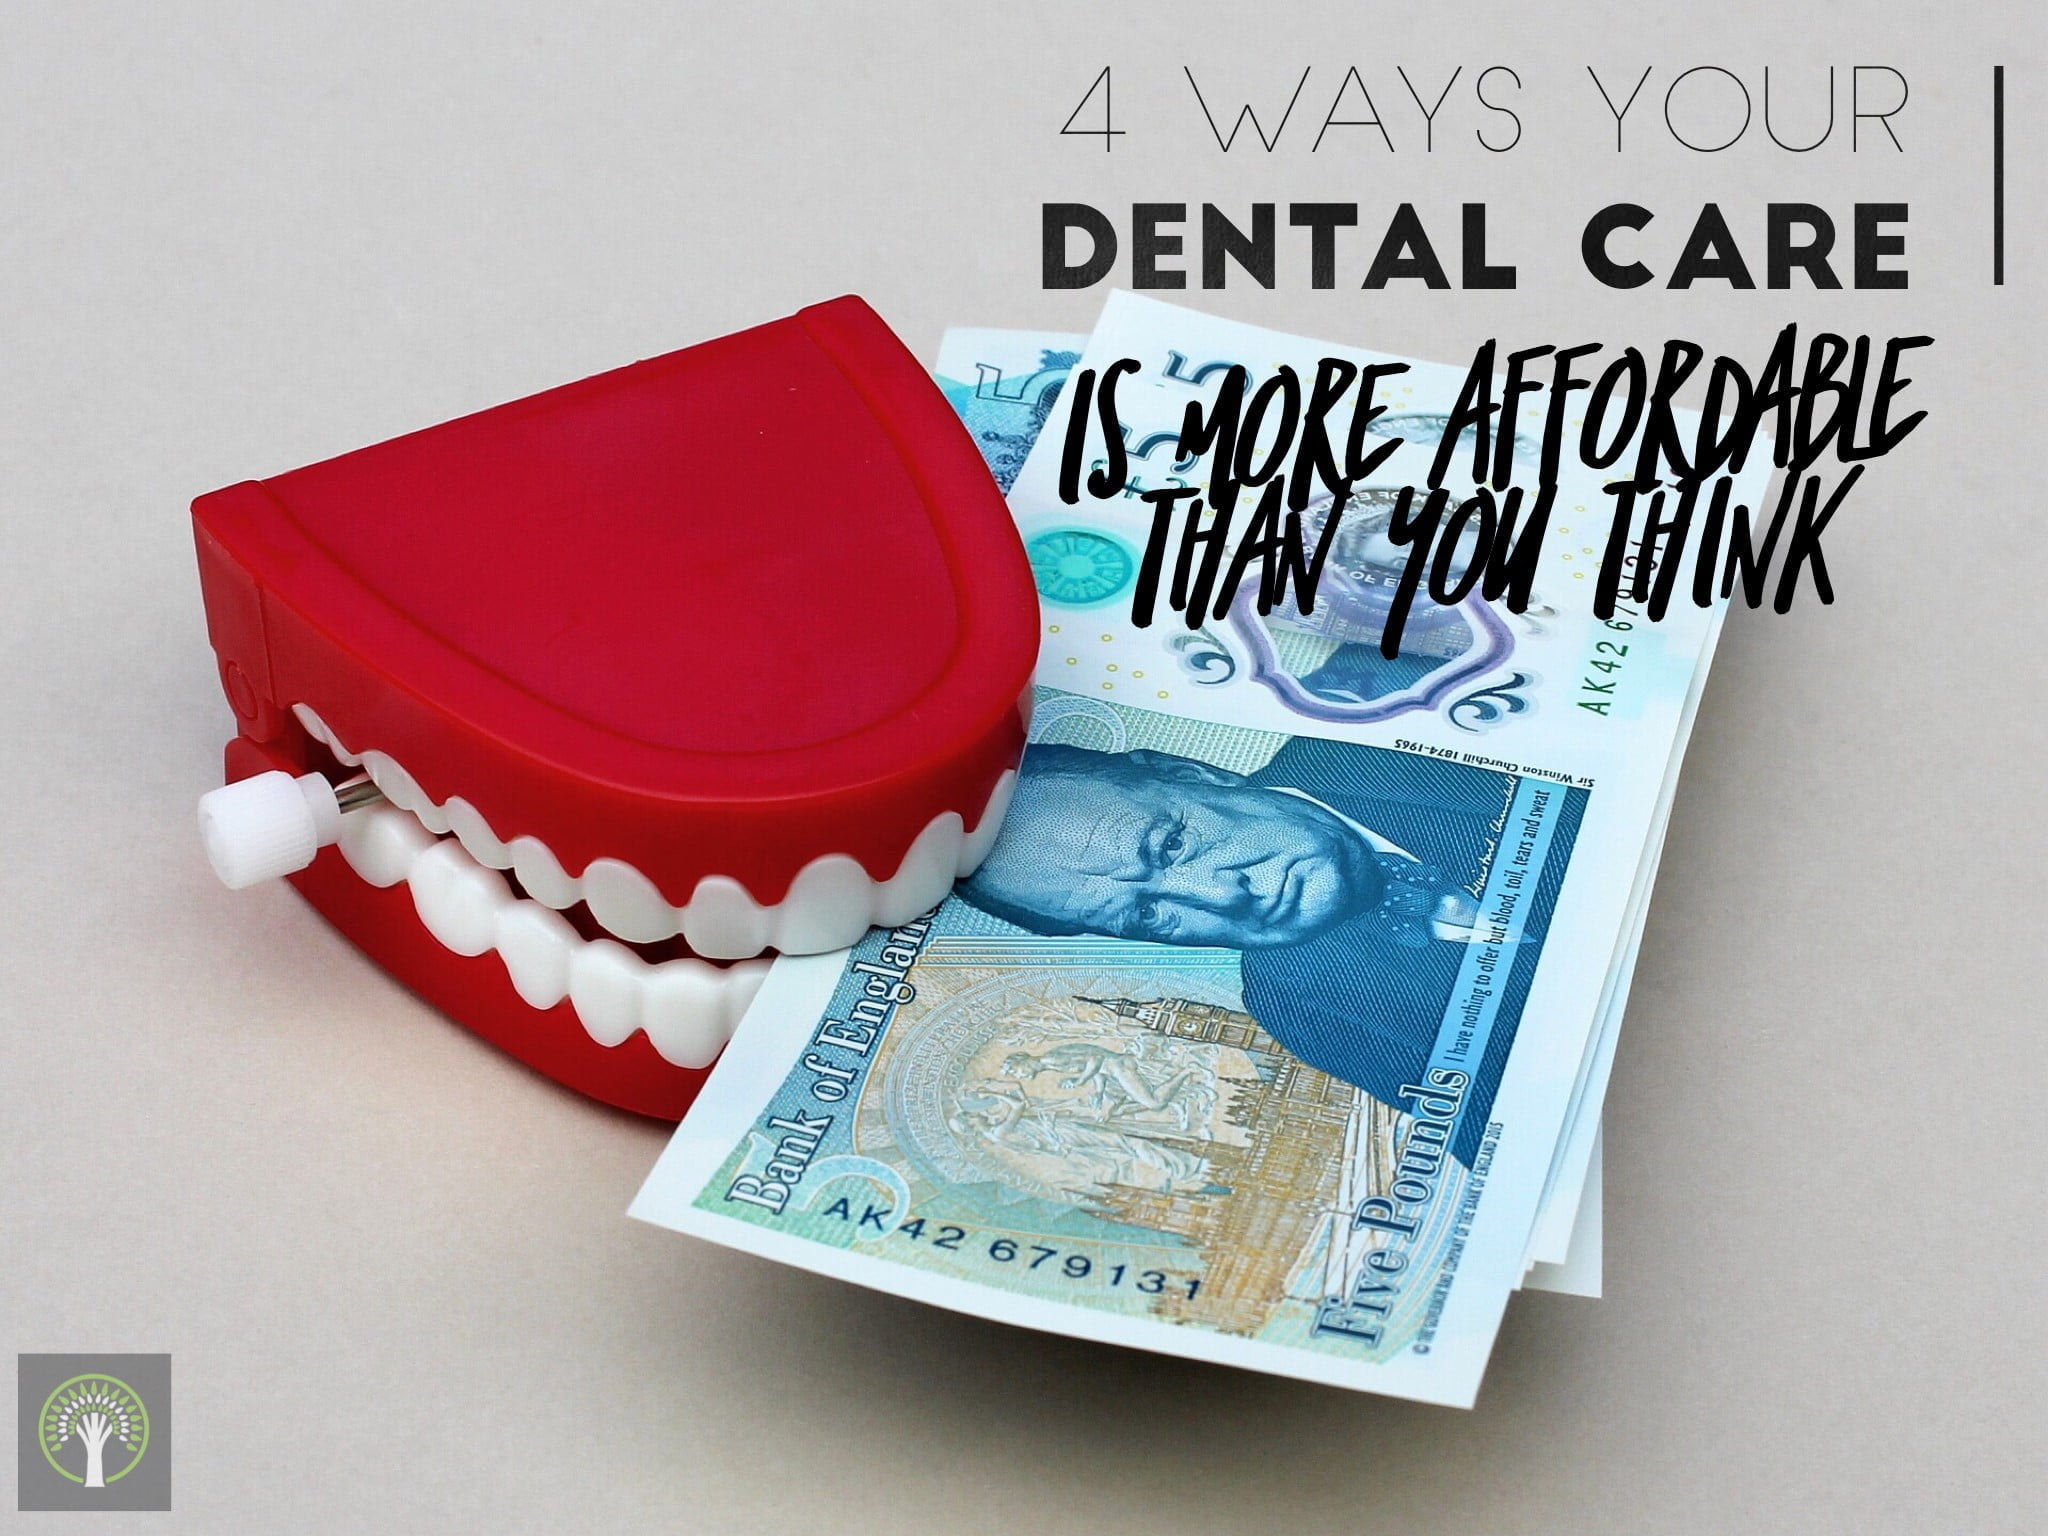 4 Ways Your Dental Care is More Affordable Than You Think